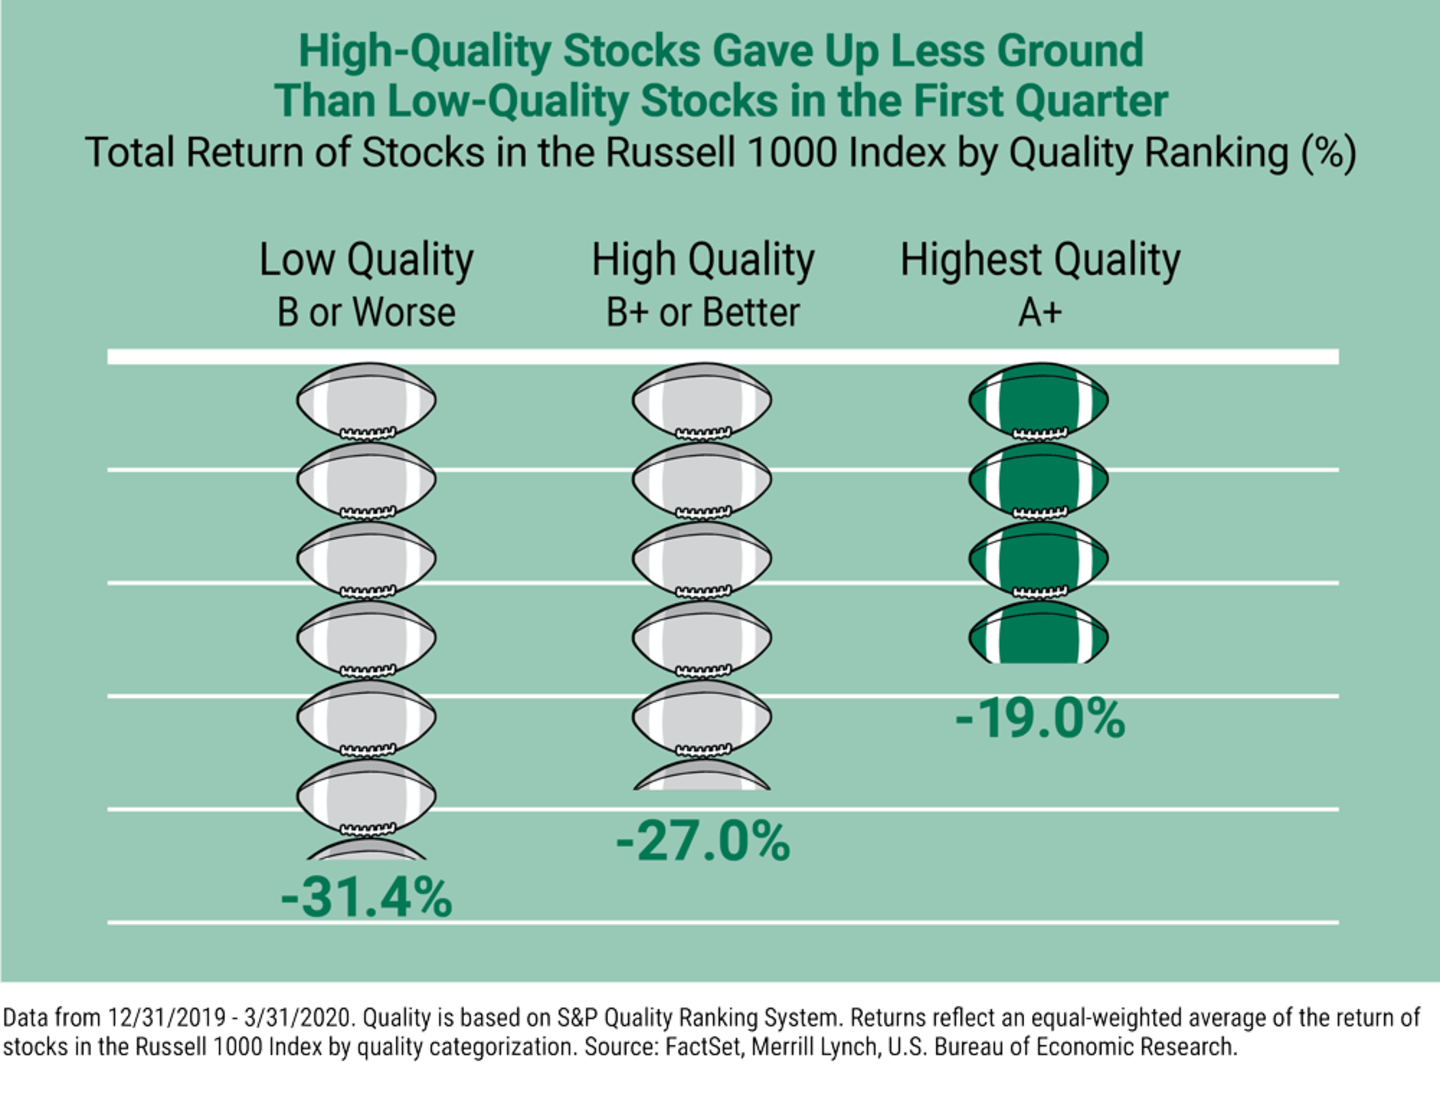 Wining with Defense: High-Quality Stocks Gave Up Less Ground Than Low-Quality Stocks in the First Quarter.